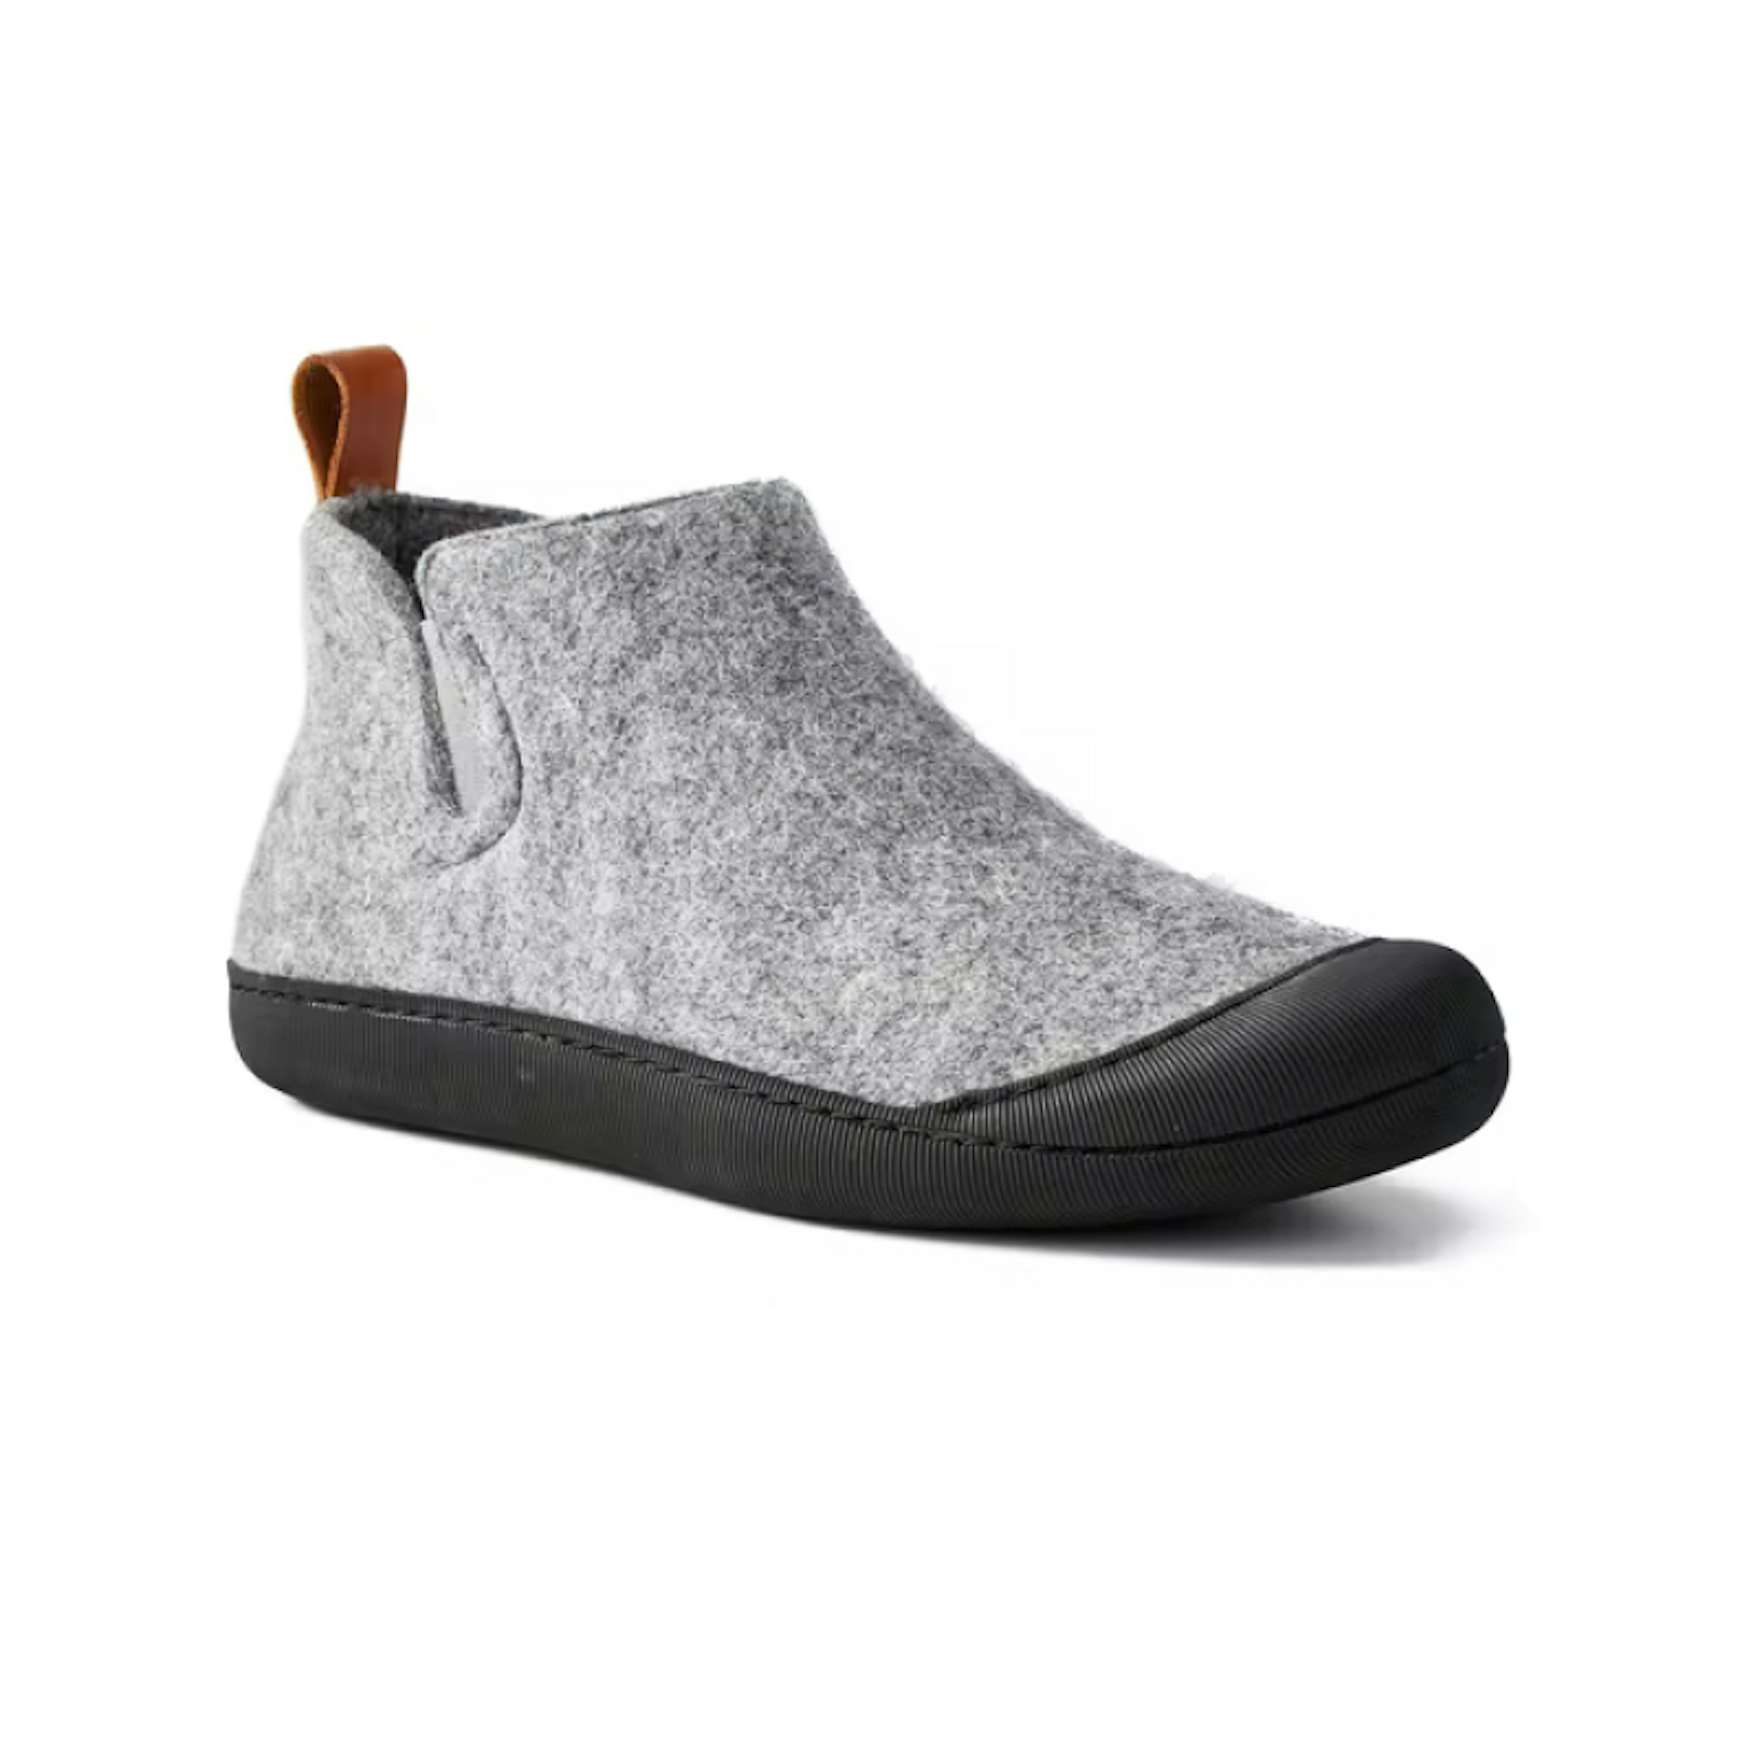 Greys The Outdoor Slipper Boot by Huckberry - Dwell